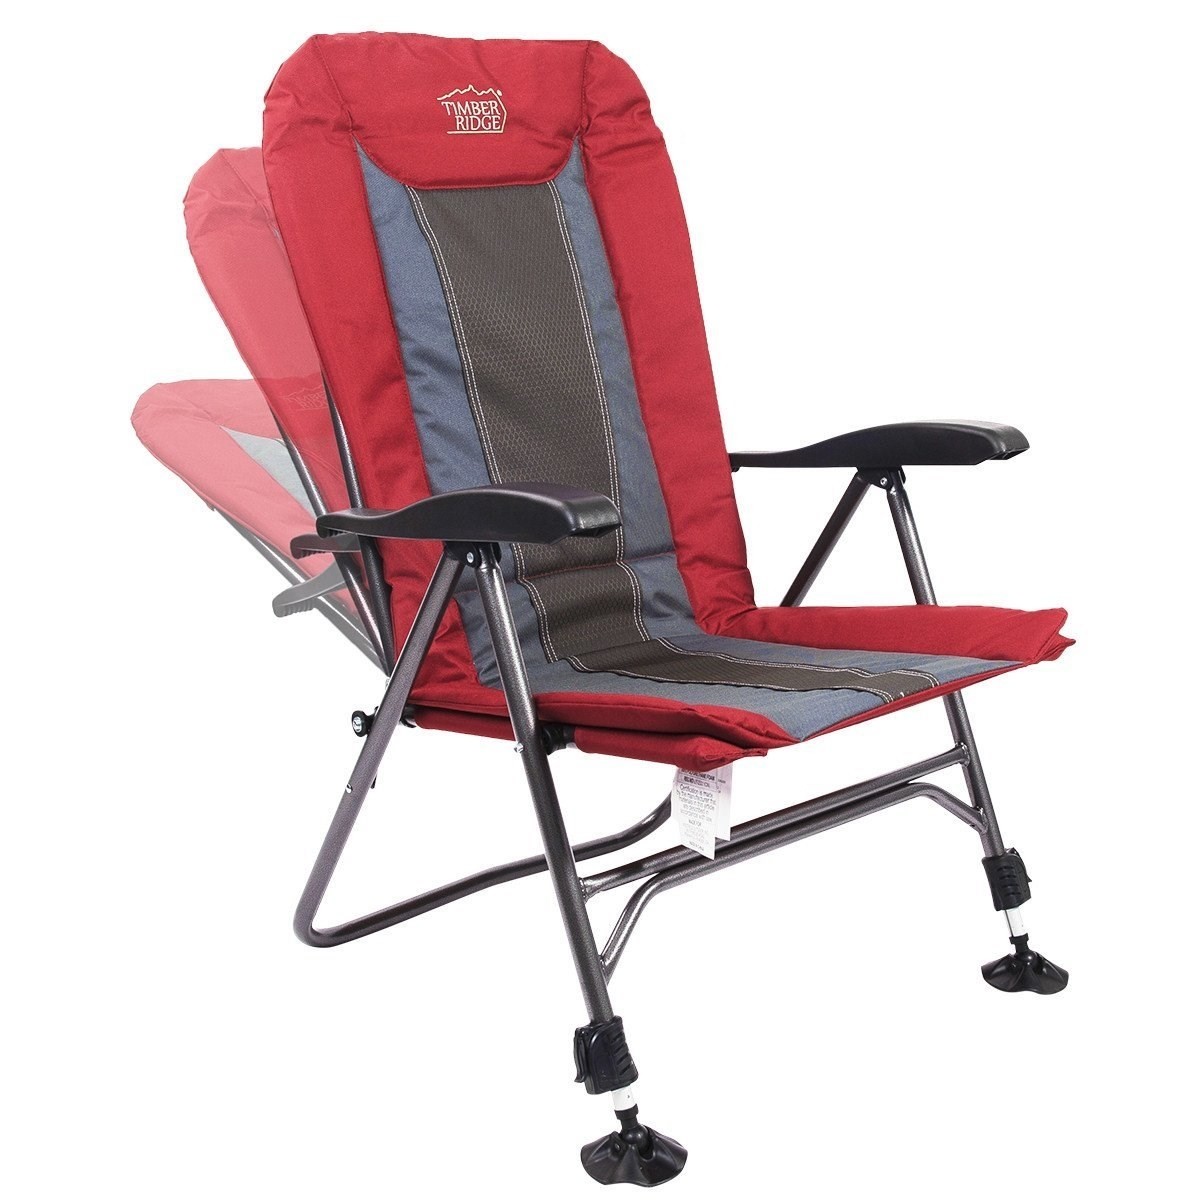 5 best folding fishing chairs must read reviews for